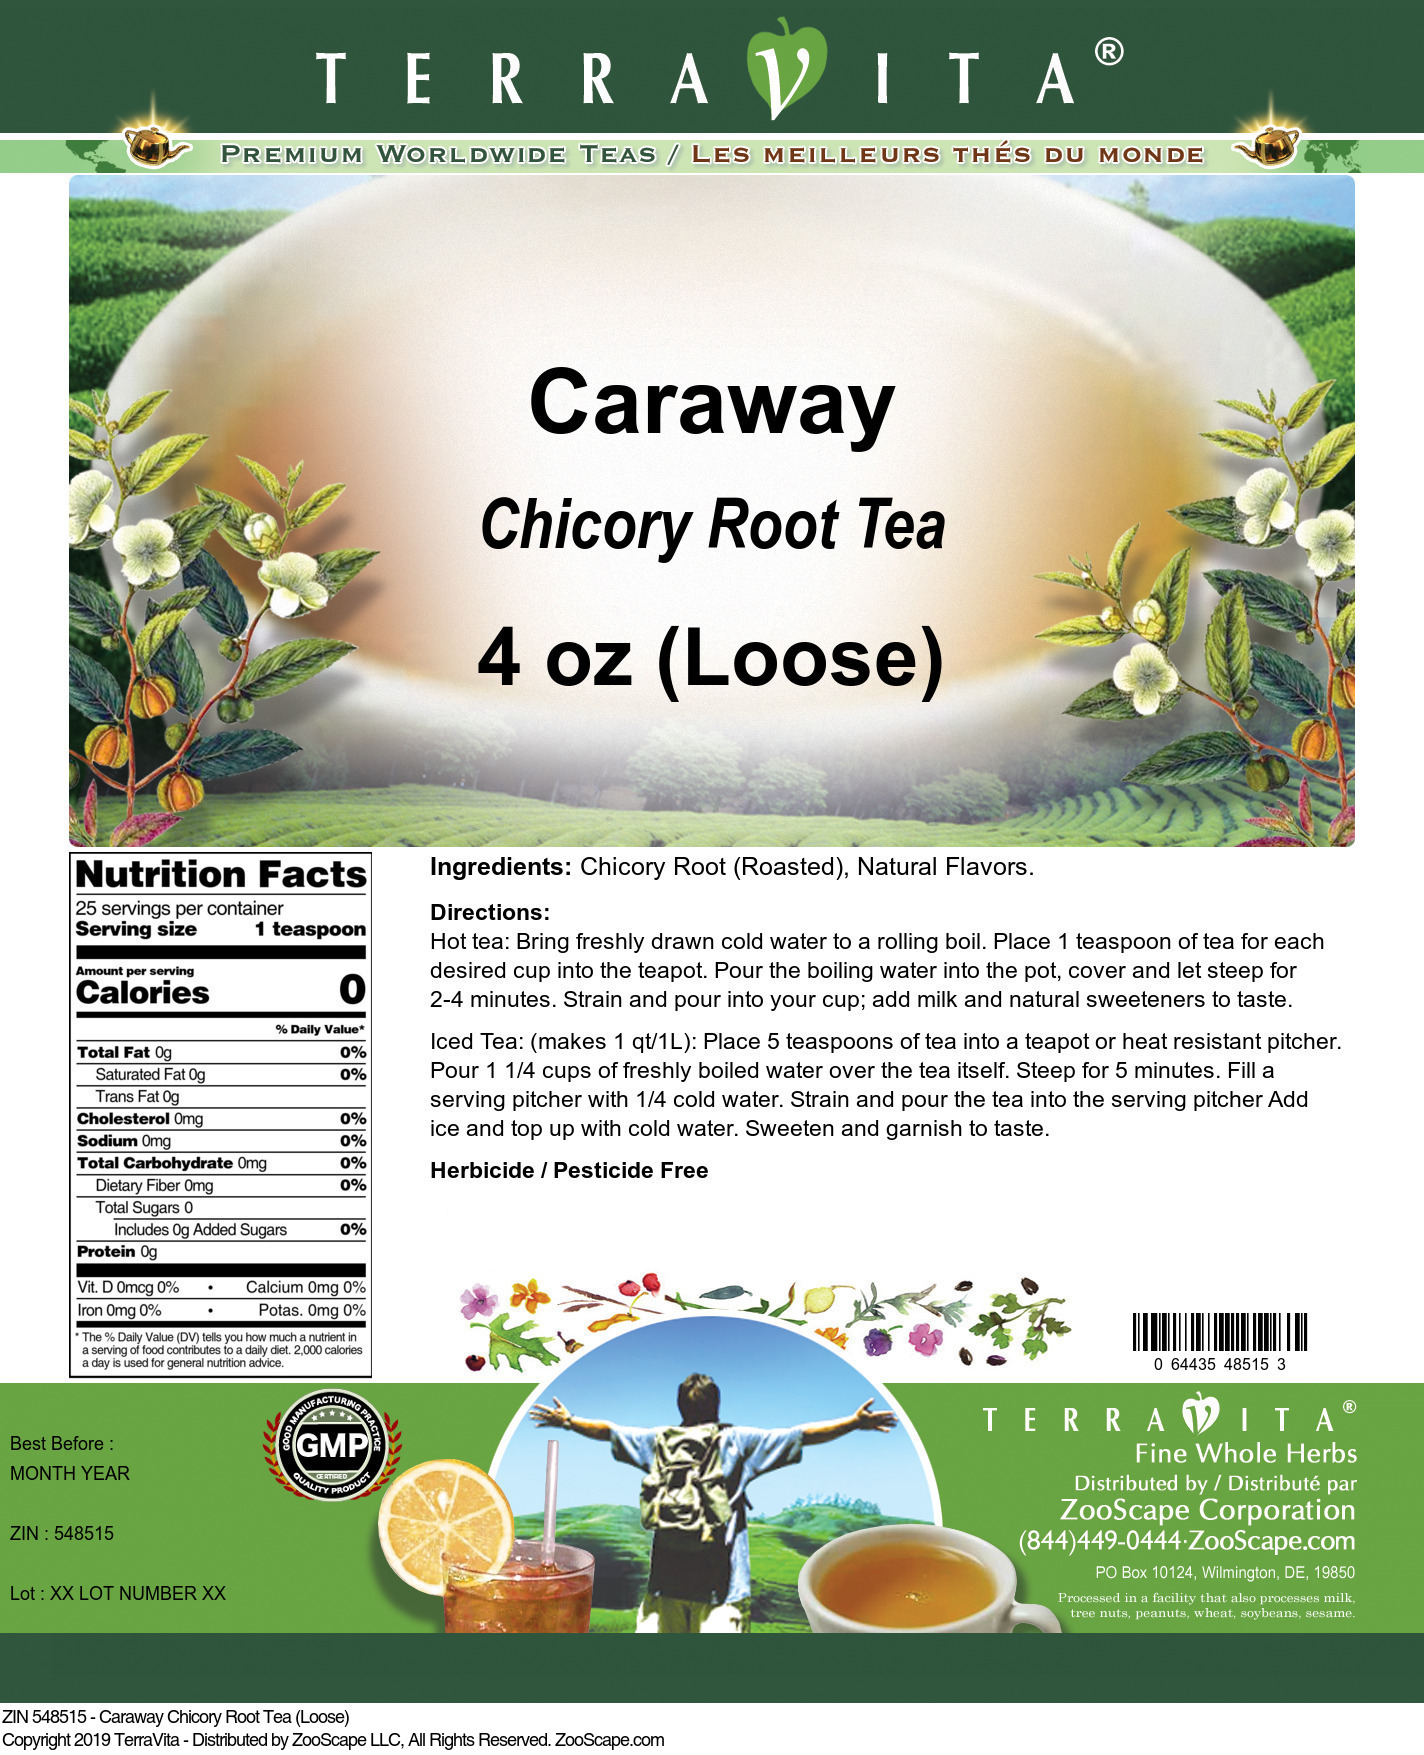 Caraway Chicory Root Tea (Loose) - Label